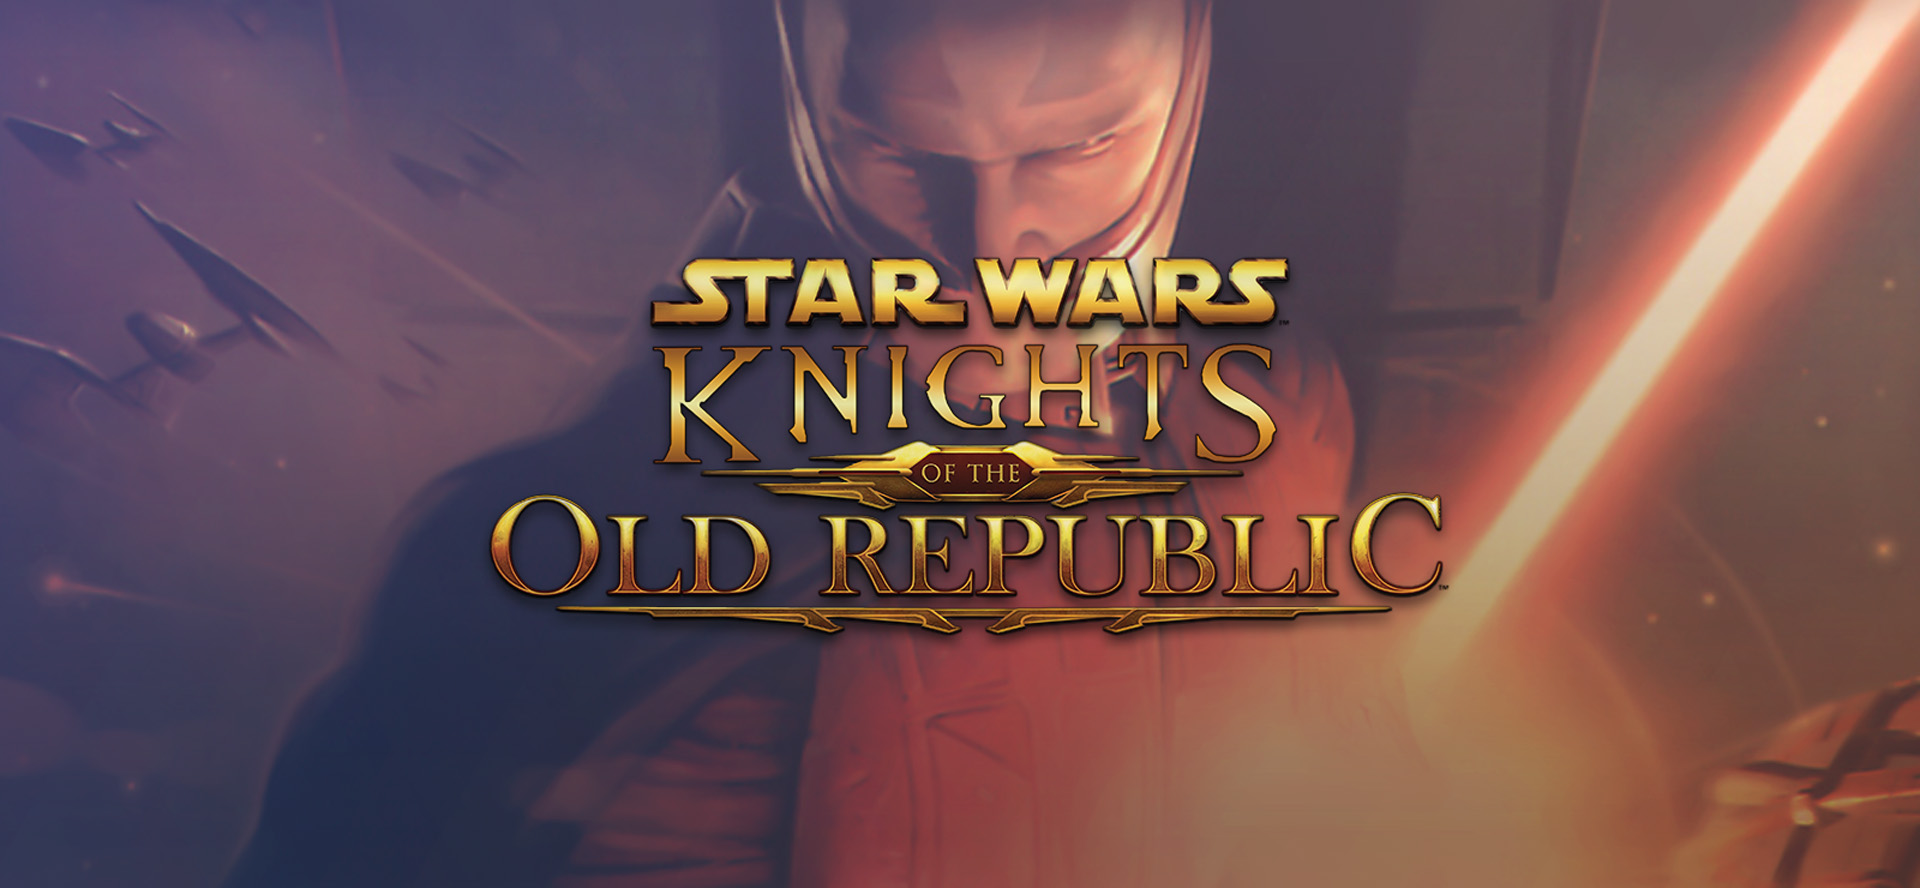 Amazing Star Wars: Knights Of The Old Republic Pictures & Backgrounds